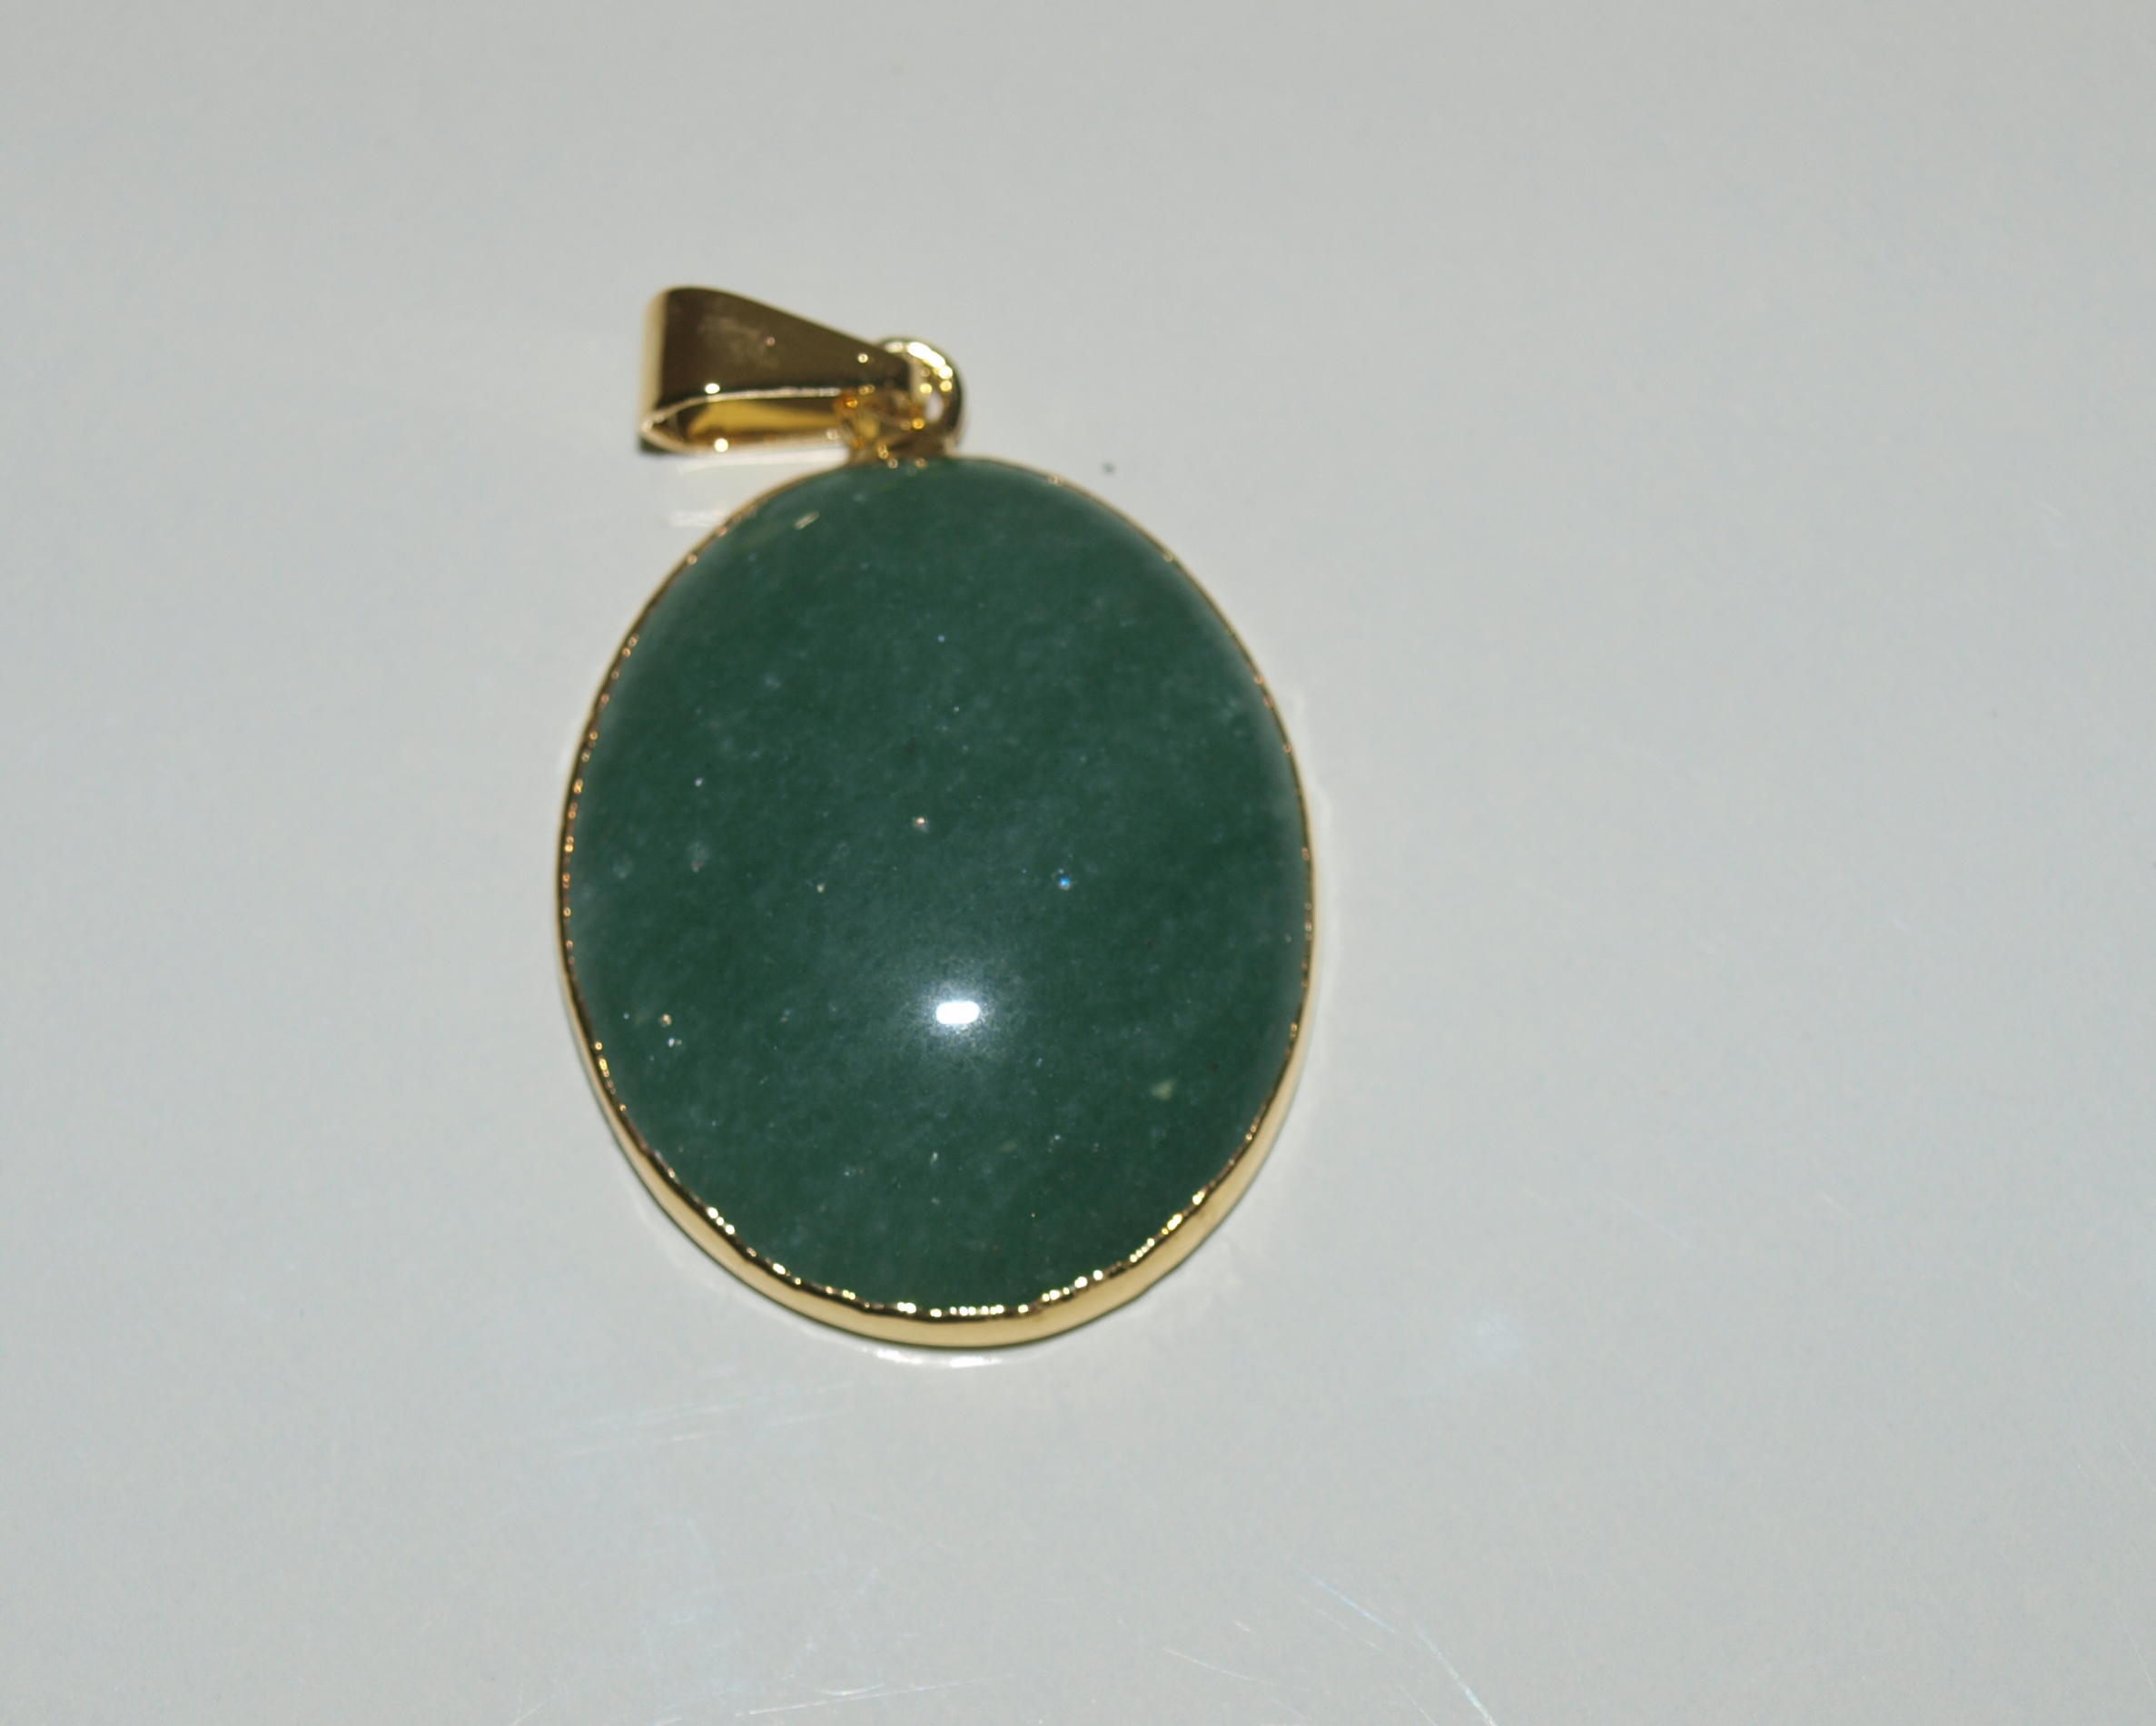 Stones from Uruguay - Green aventurine Oval Cabochon Pendant, 30x20mm, Gold Plated